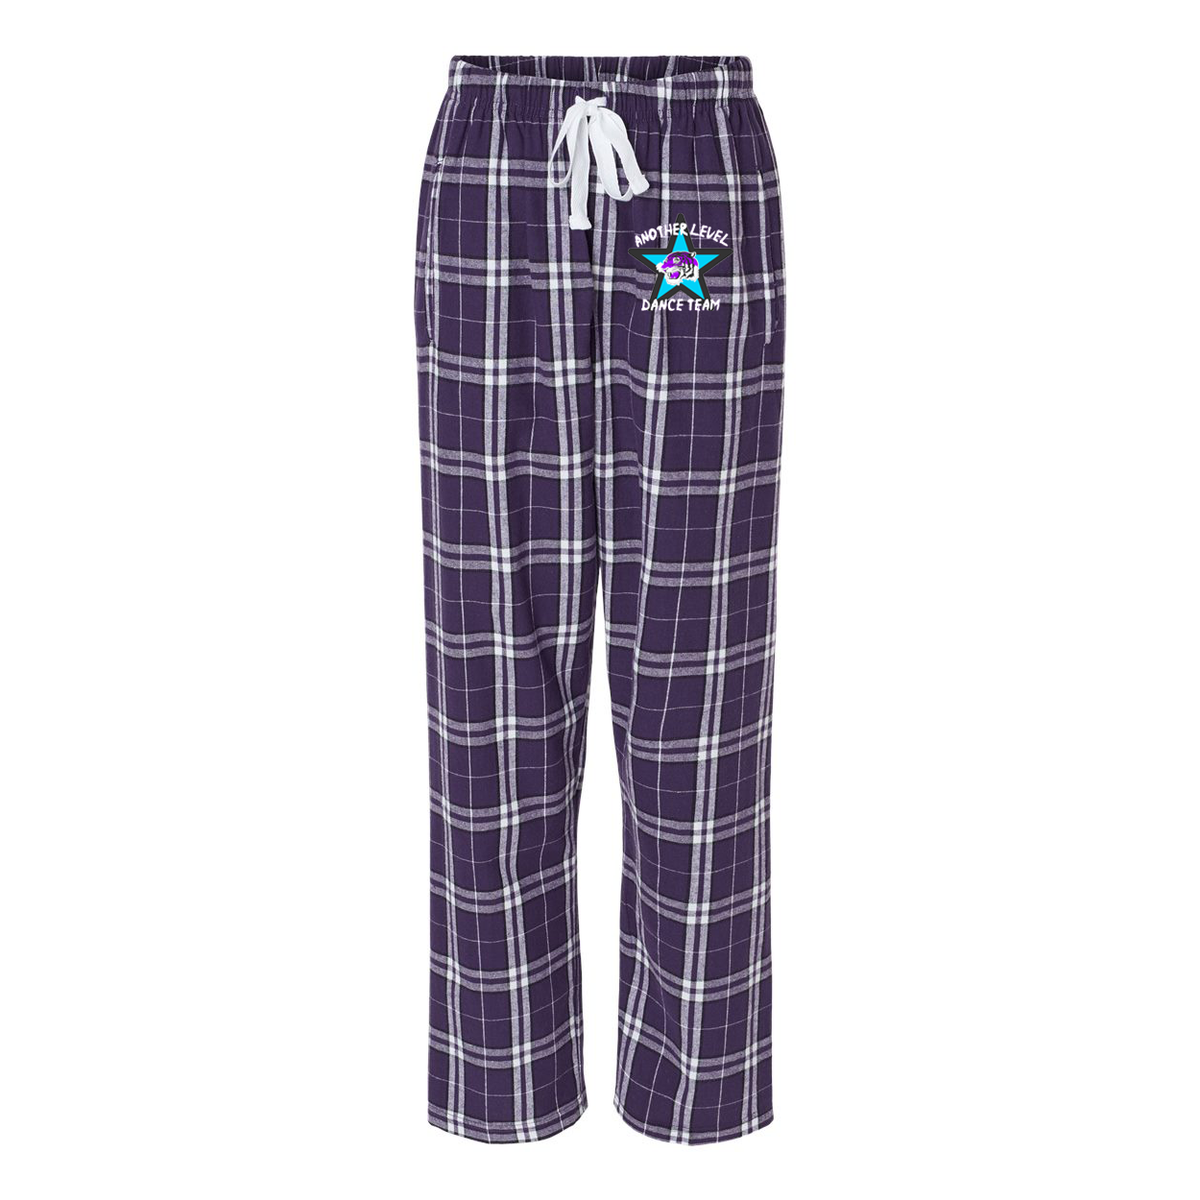 Another Level Dance Team Women's Haley Flannel Pants